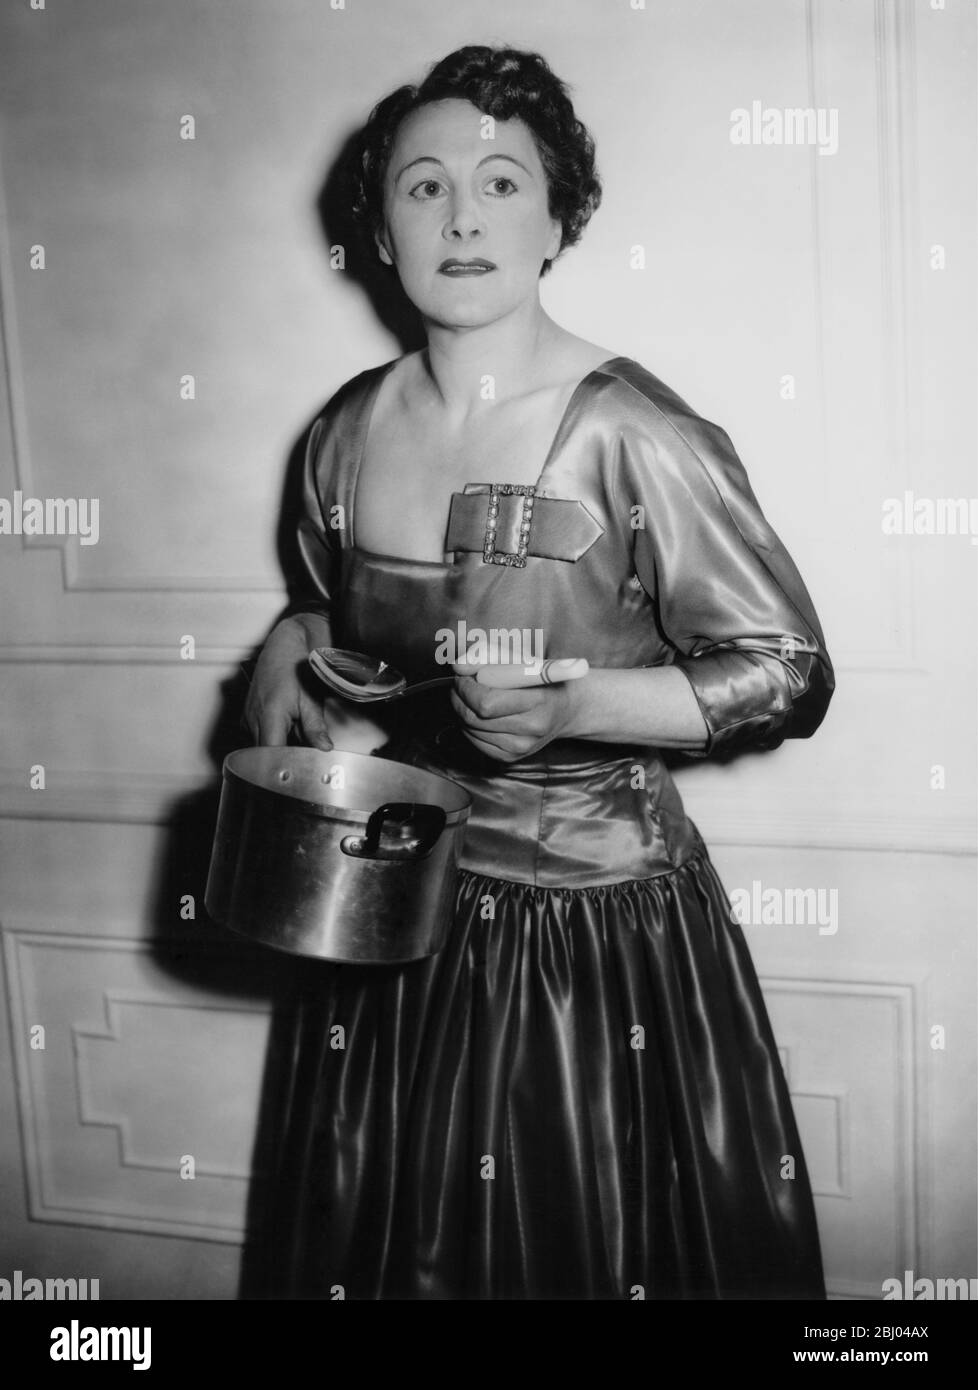 Cookery expert with an eye to fashion is Mrs Phyllis Cradock. She stars in a new television series Kitchen Magic. 17th February 1955 - Fanny Cradock - Stock Photo